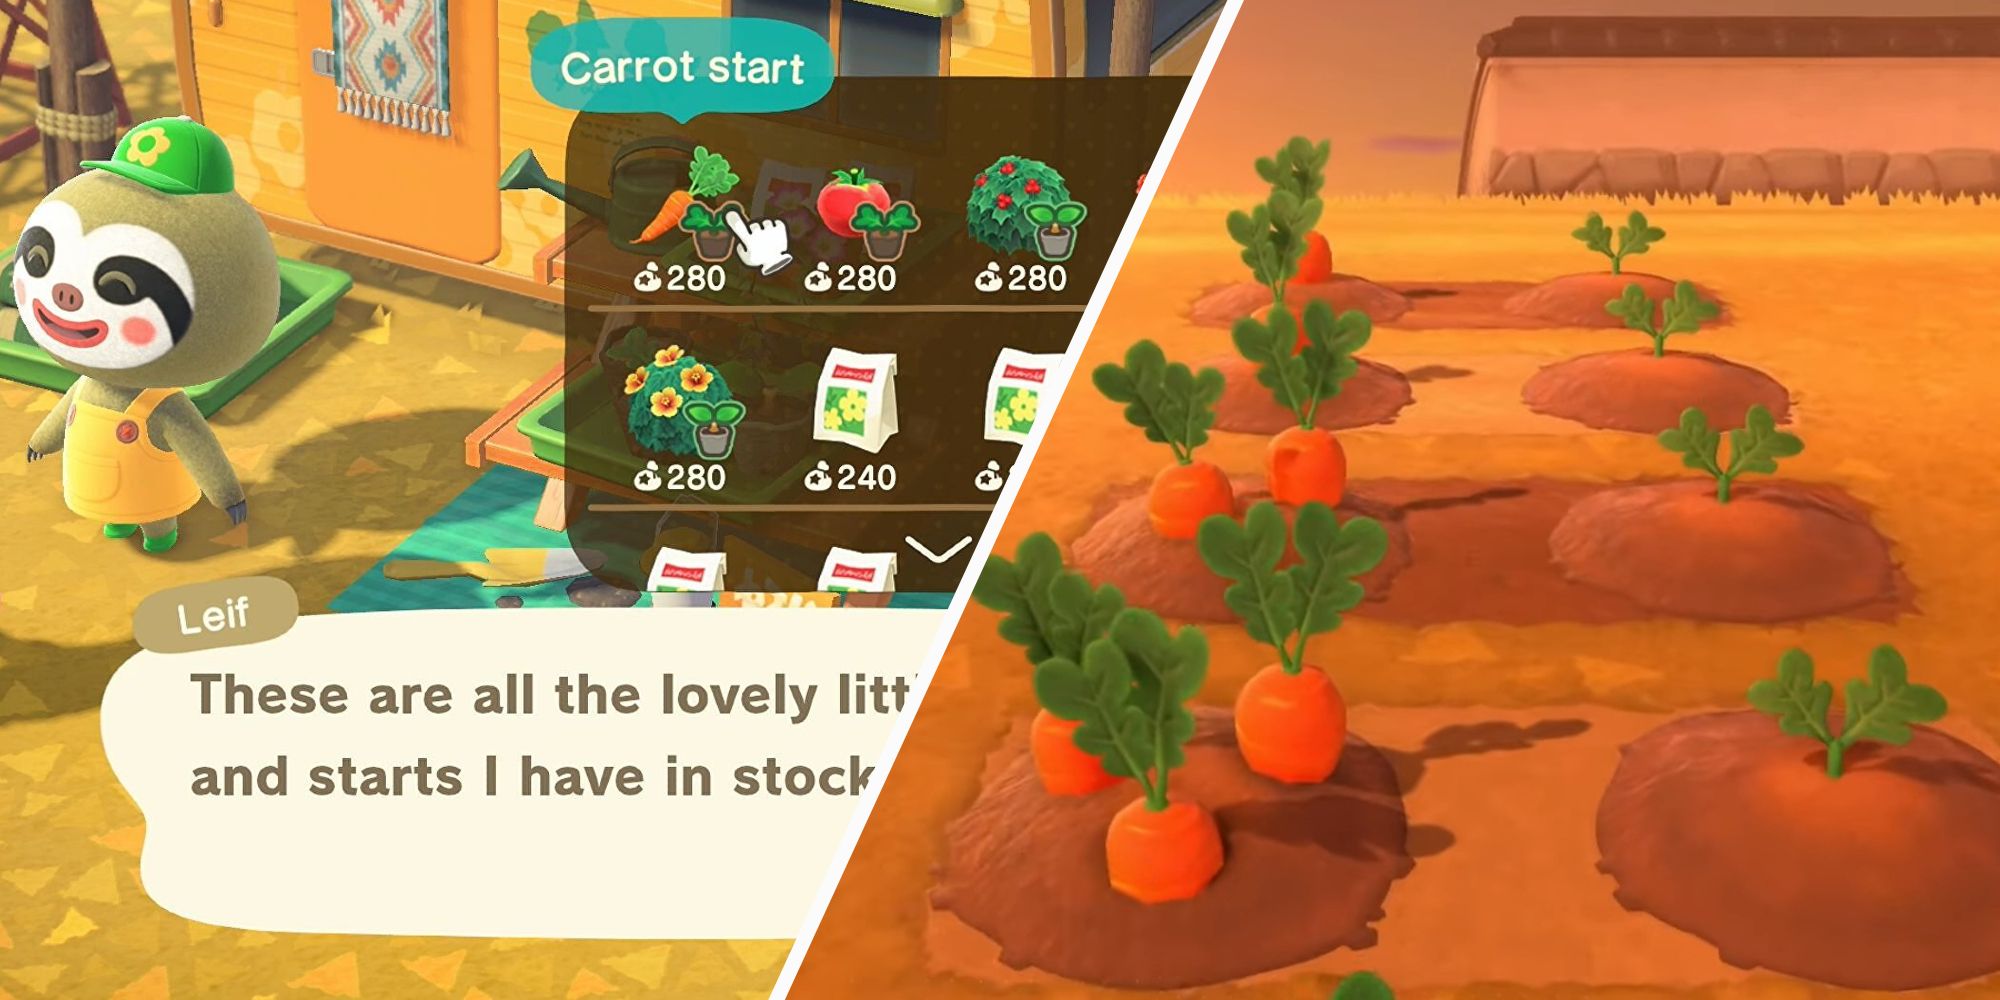 Where to get Carrots in Animal Crossing: New Horizons 